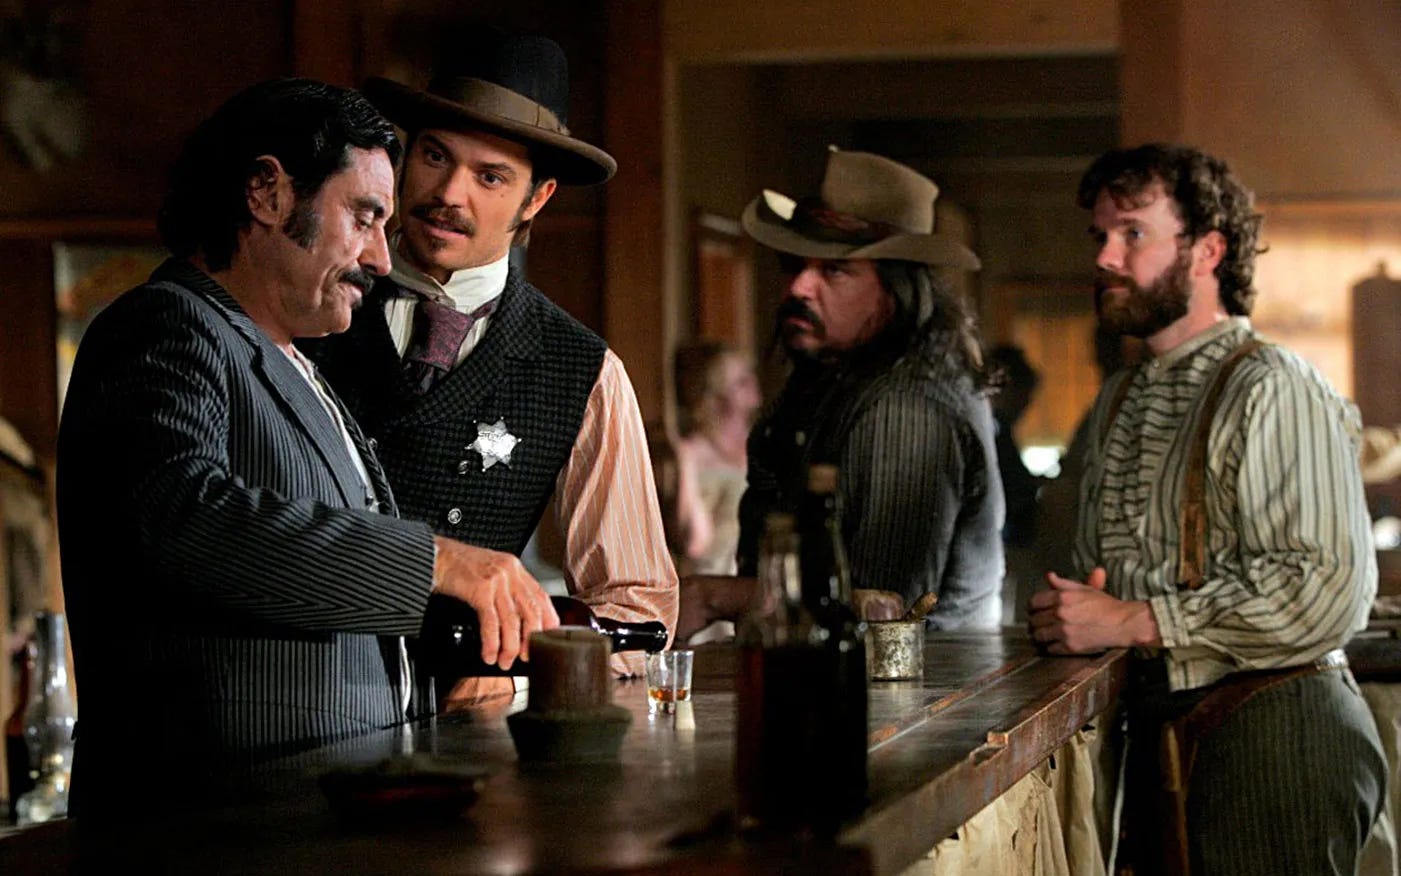 This image shows four men standing at the Gem Saloon's bar in a scene from David Milch's television series Deadwood. From left to right: Al Swearengen (played by Ian McShane, pouring whiskey into a shot glass), Sheriff Seth Bullock (played by Timothy Olyphant), Dan Dority (played by W. Earl Brown), and Johnny Burns (played by Seth Bridgers).